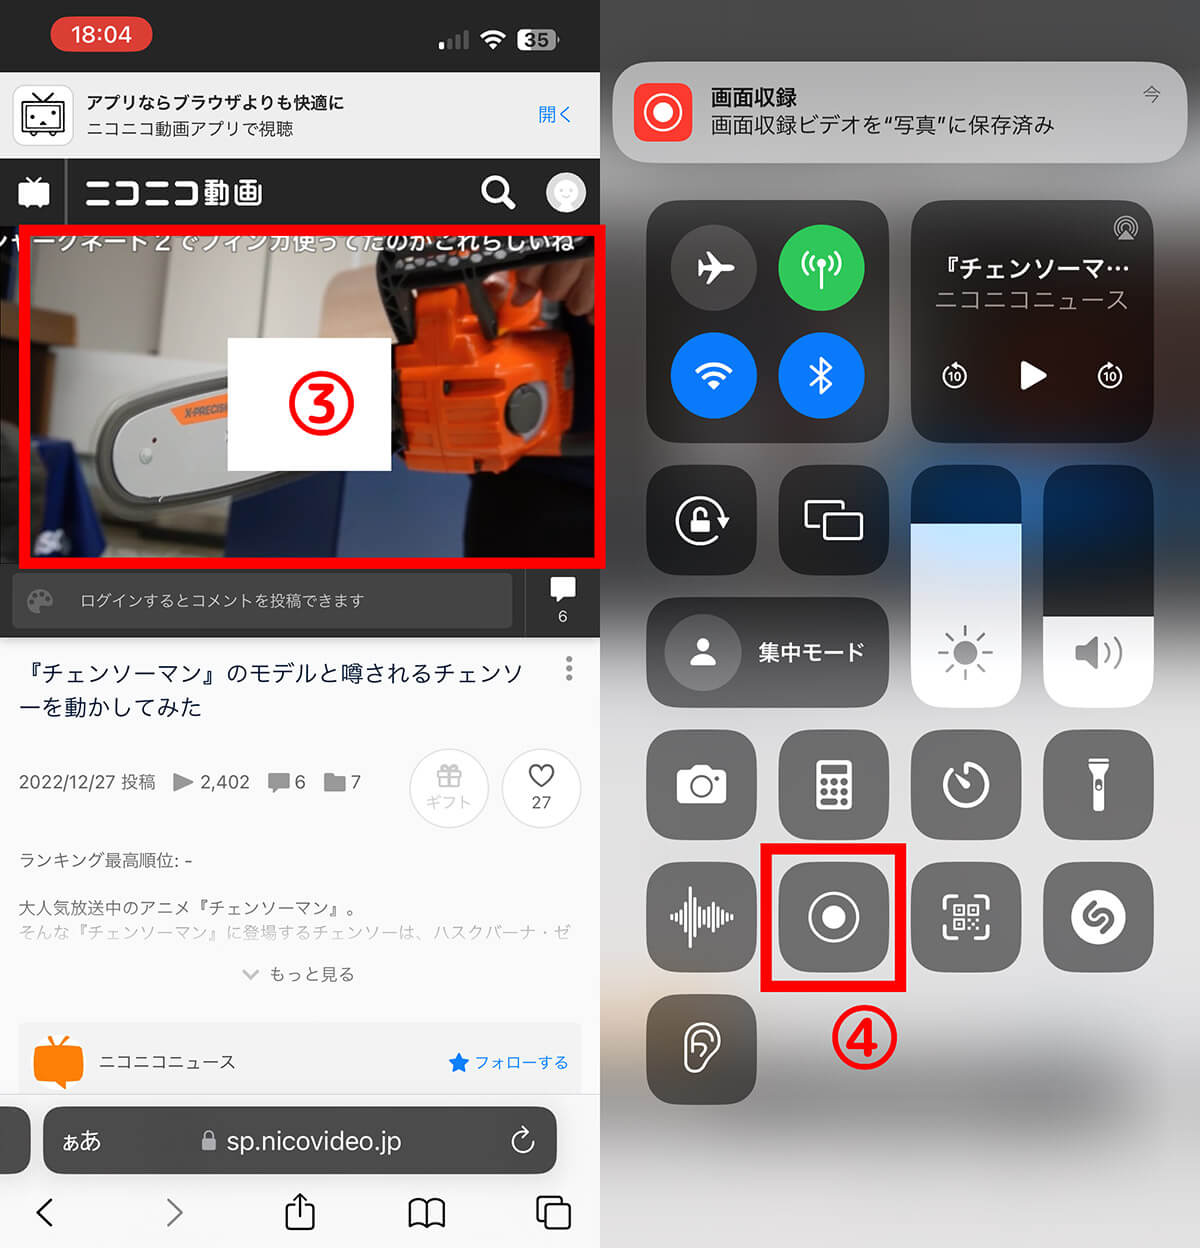 【4】Documents by Readdle（iPhone / 高音質：320kbps対応）：画面収録を利用し音声を抽出可能2